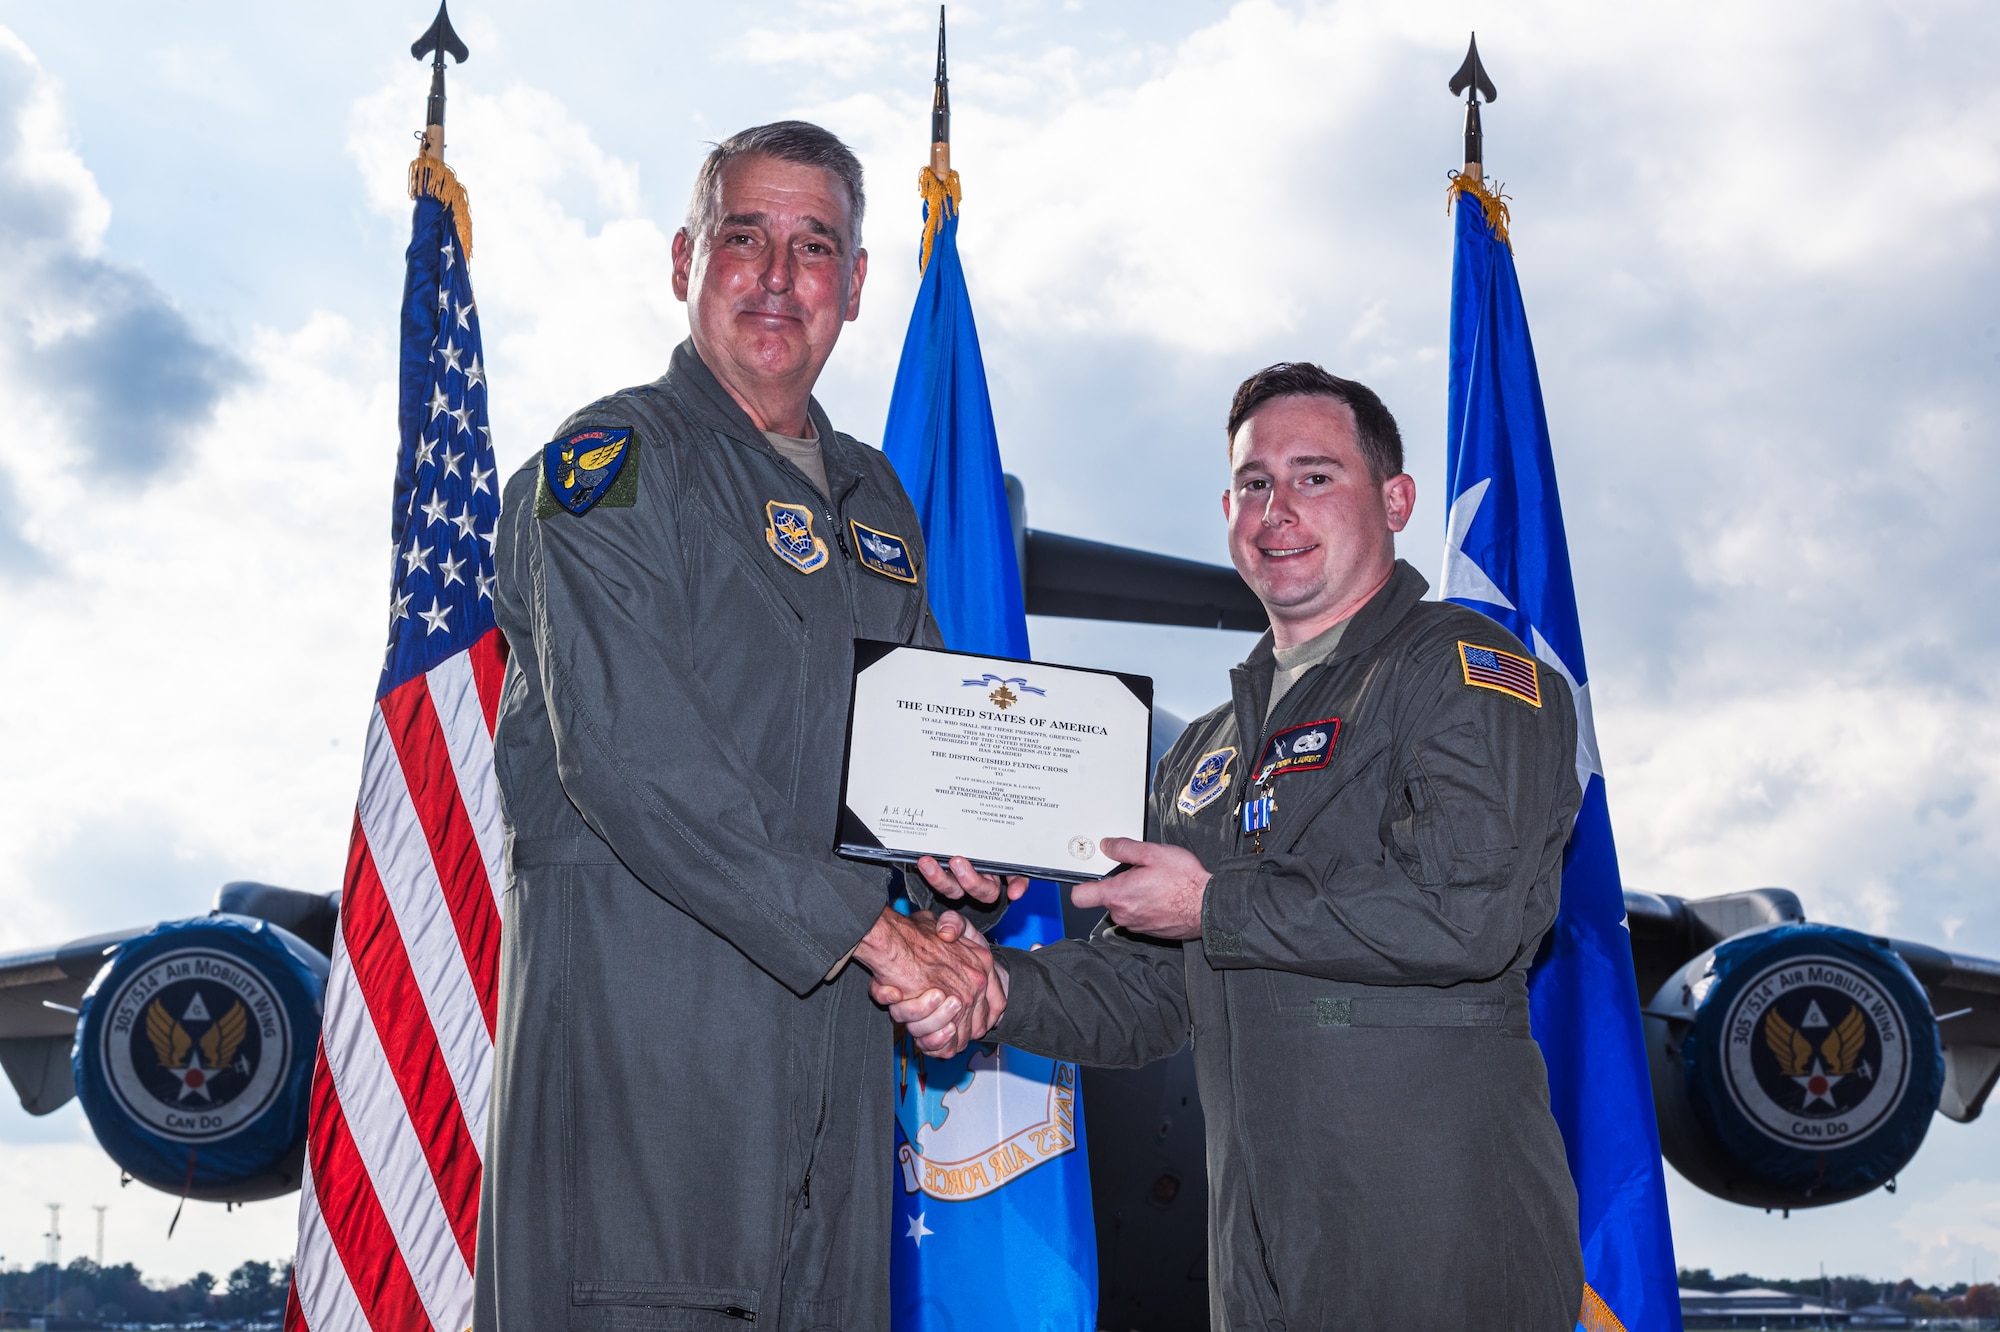 U.S. Air Force Staff Sgt. Derek Laurent, 305th Aircraft Maintenance Squadron flying crew chief, is awarded the distinguished flying cross with valor by Gen. Mike Minihan, Air Mobility Command commander, on Joint Base McGuire-Dix-Lakehurst, N.J., Nov. 1, 2022. The distinguished flying cross with valor is one of the highest awards for extraordinary achievement and is awarded for heroism while participating in aerial flight. (U.S. Air Force photo by Senior Airman Joseph Morales)